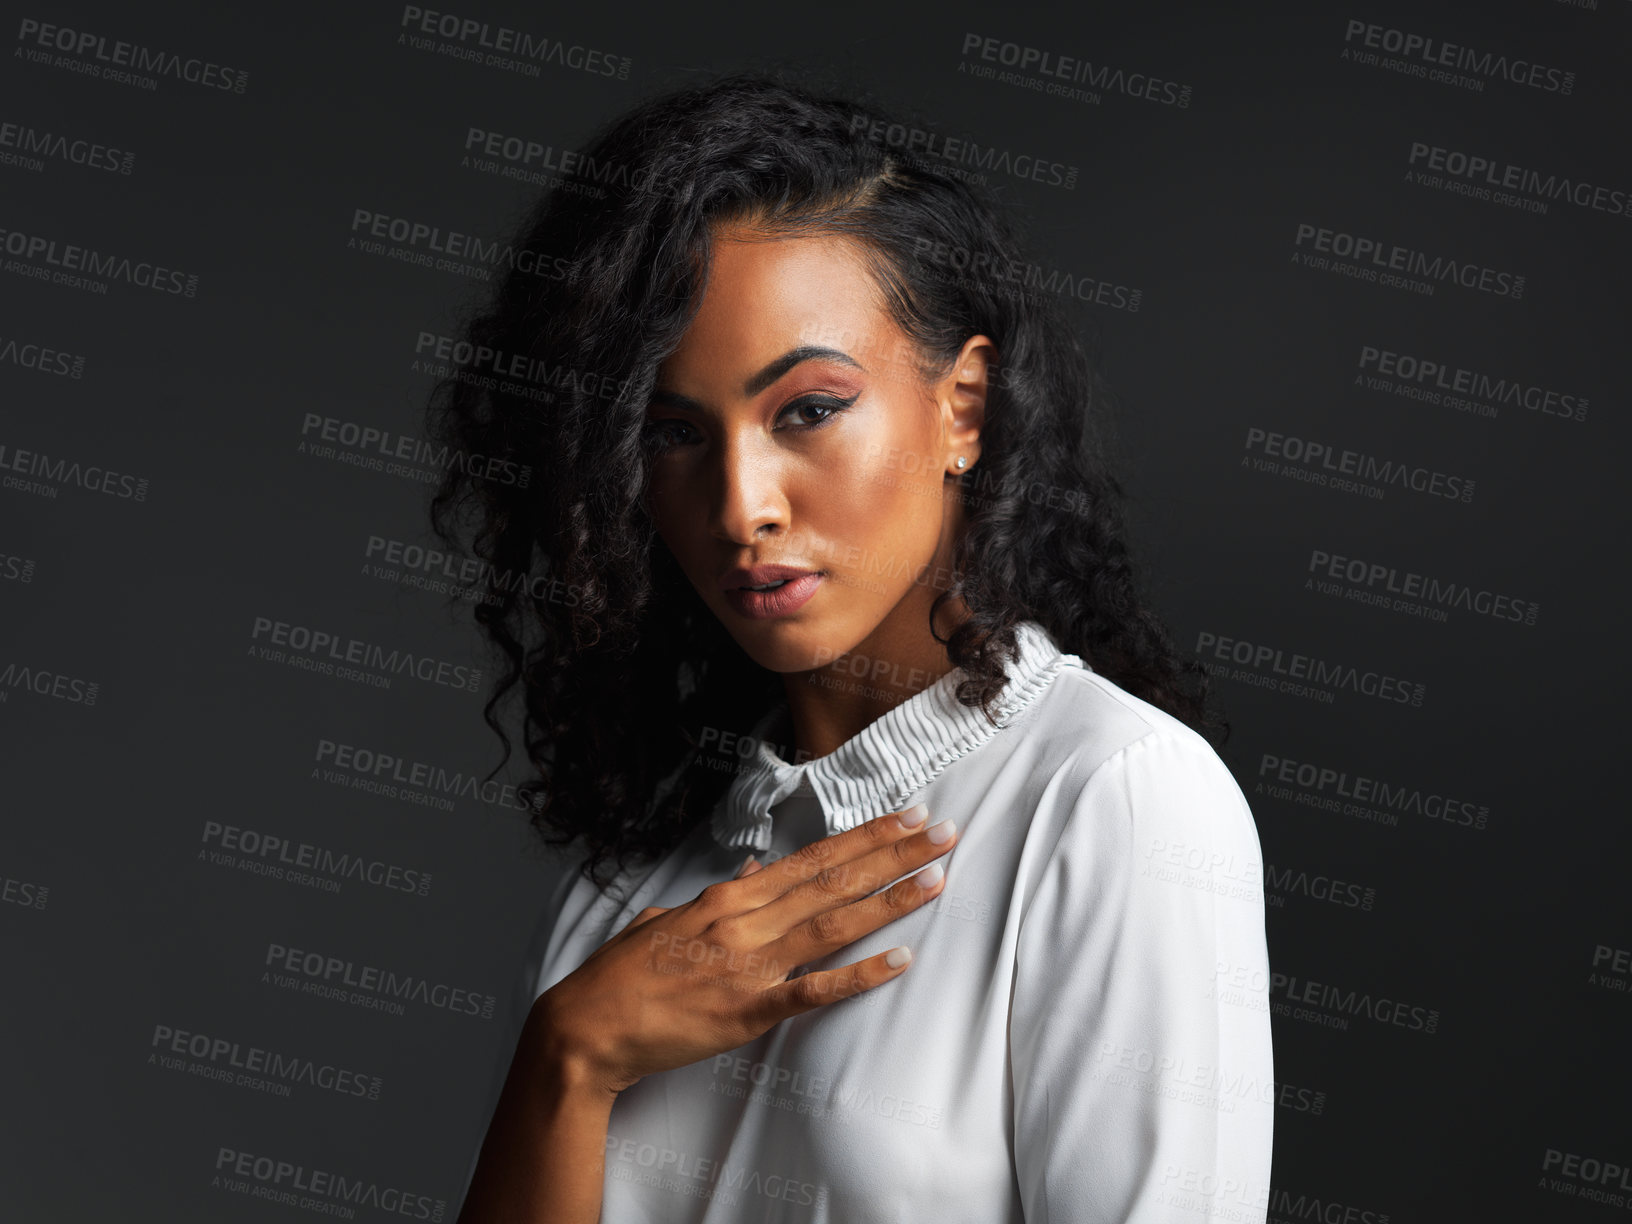 Buy stock photo Portrait of an attractive young woman wearing a white blouse and posing seductively against a dark background in the studio